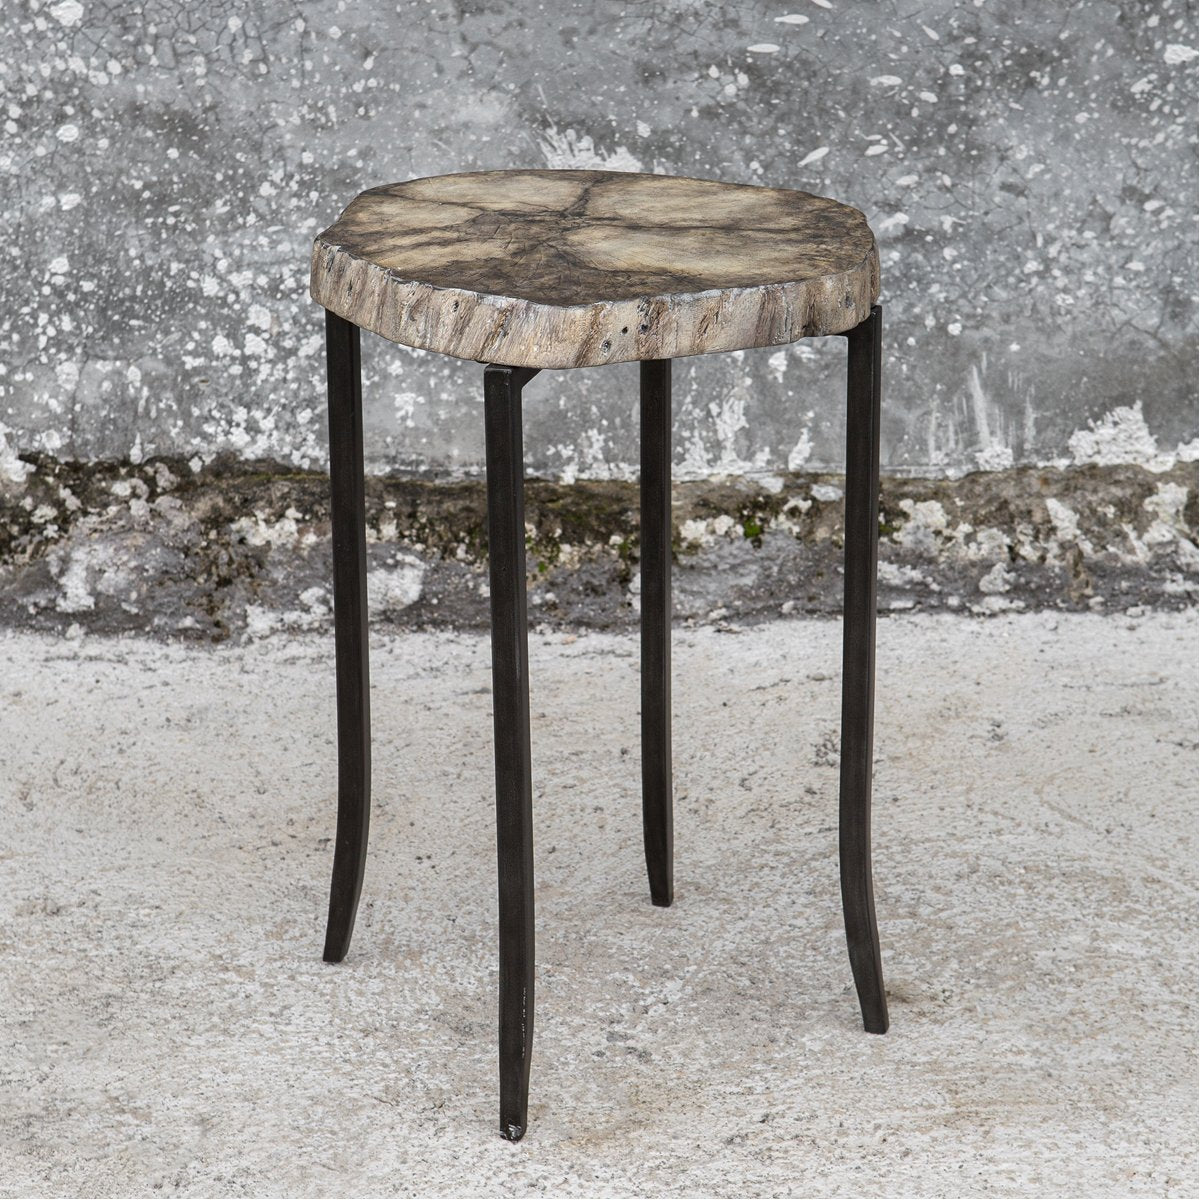 Uttermost Stiles Rustic Accent Table